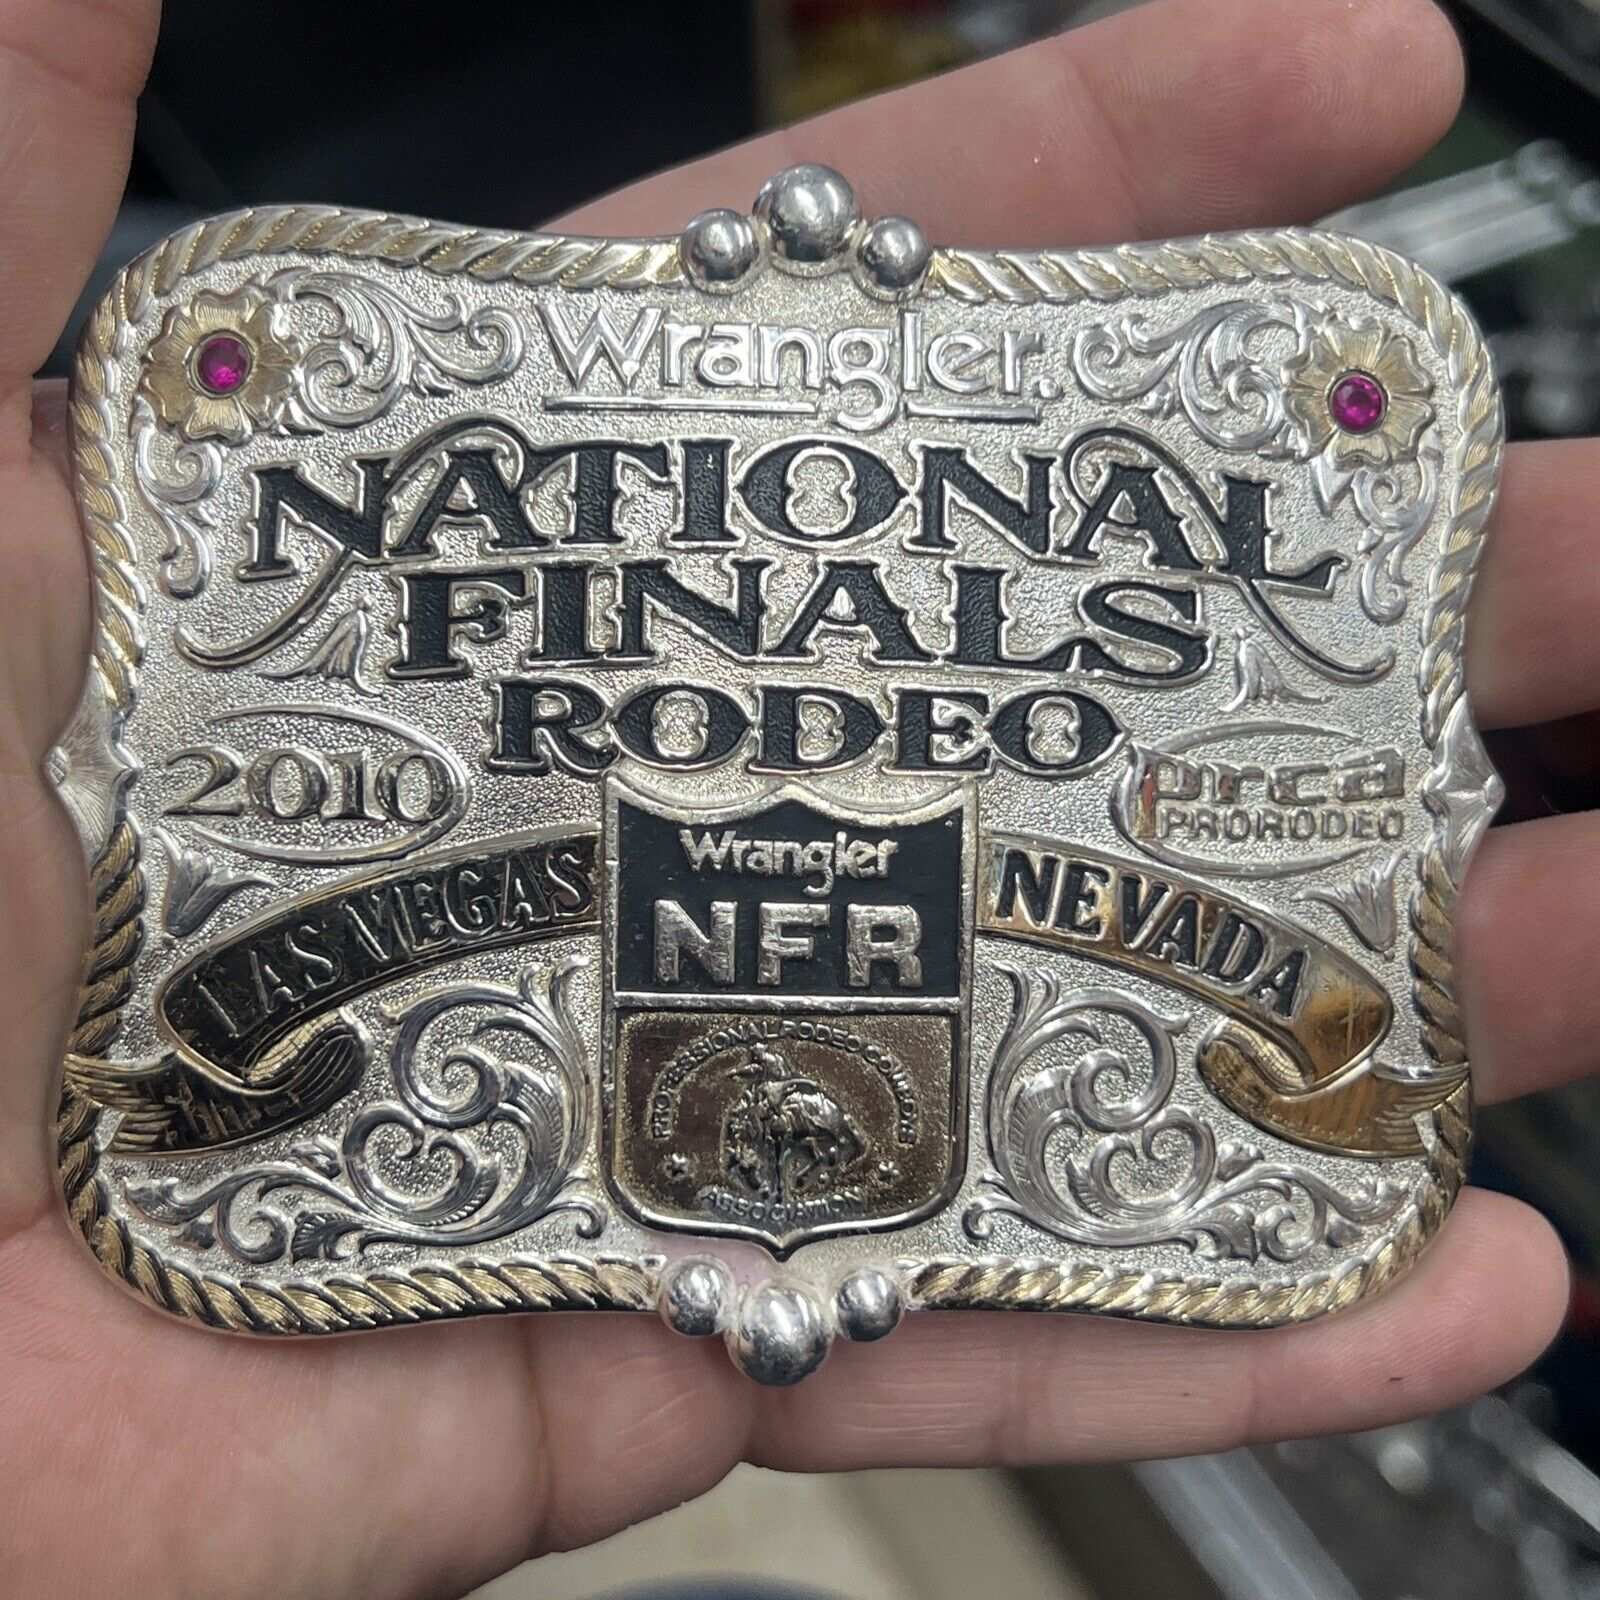 Montana Silversmiths PRCA 2010 Wrangler National Finals Rodeo Buckle Limited